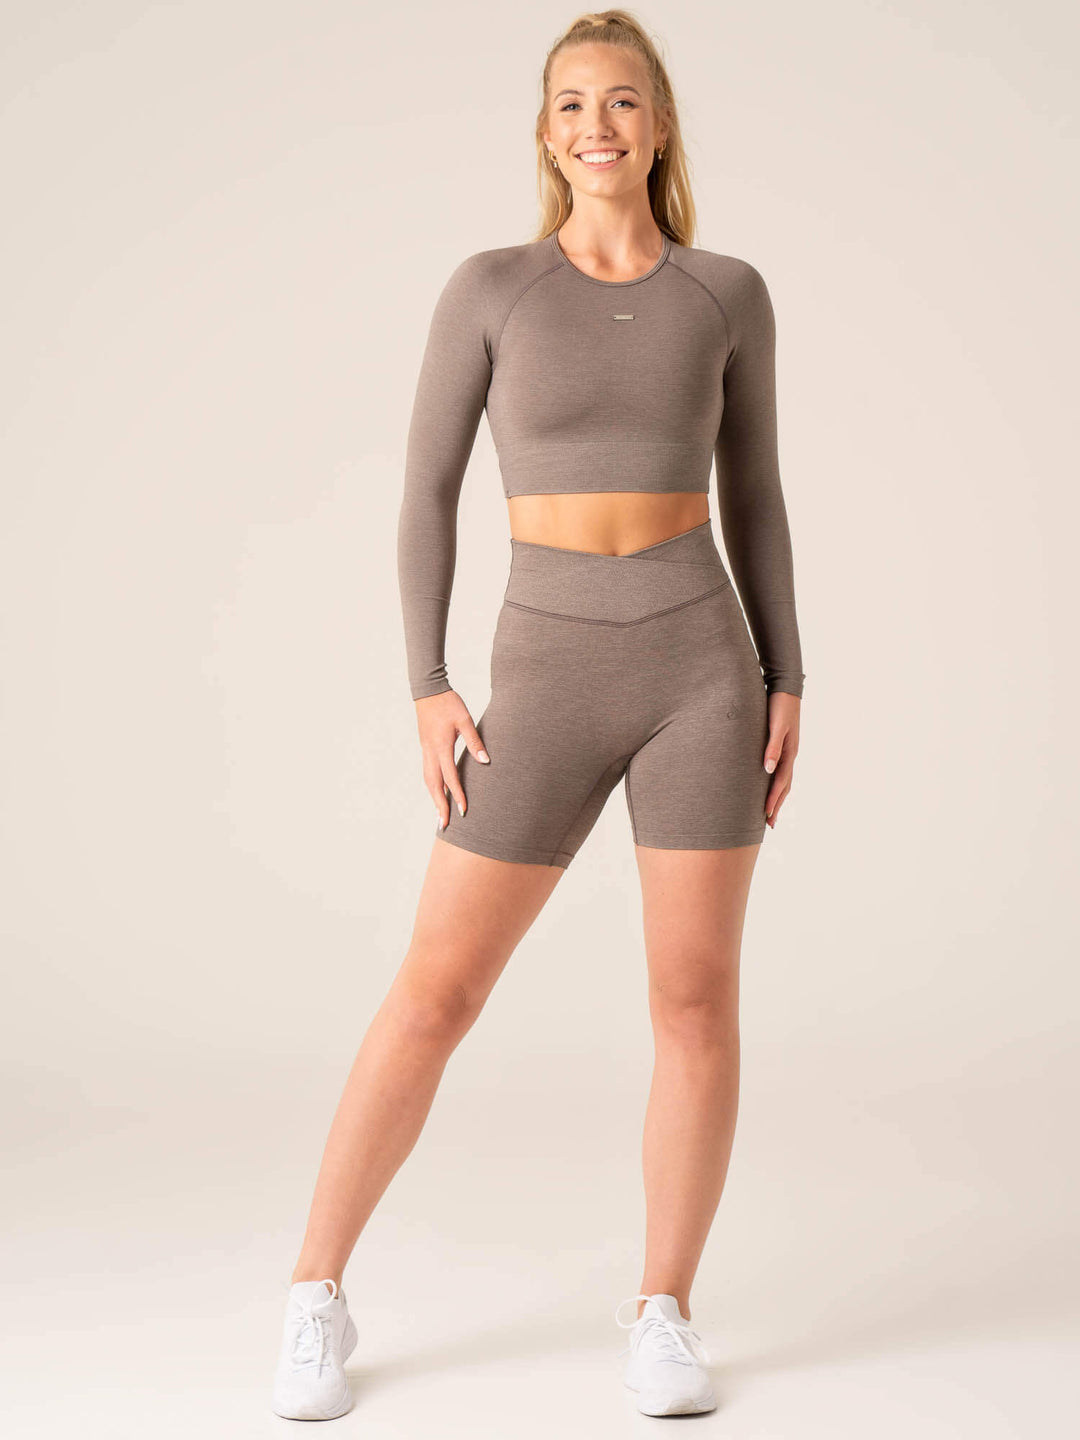 Focus Seamless Long Sleeve Top - Taupe Marl Clothing Ryderwear 